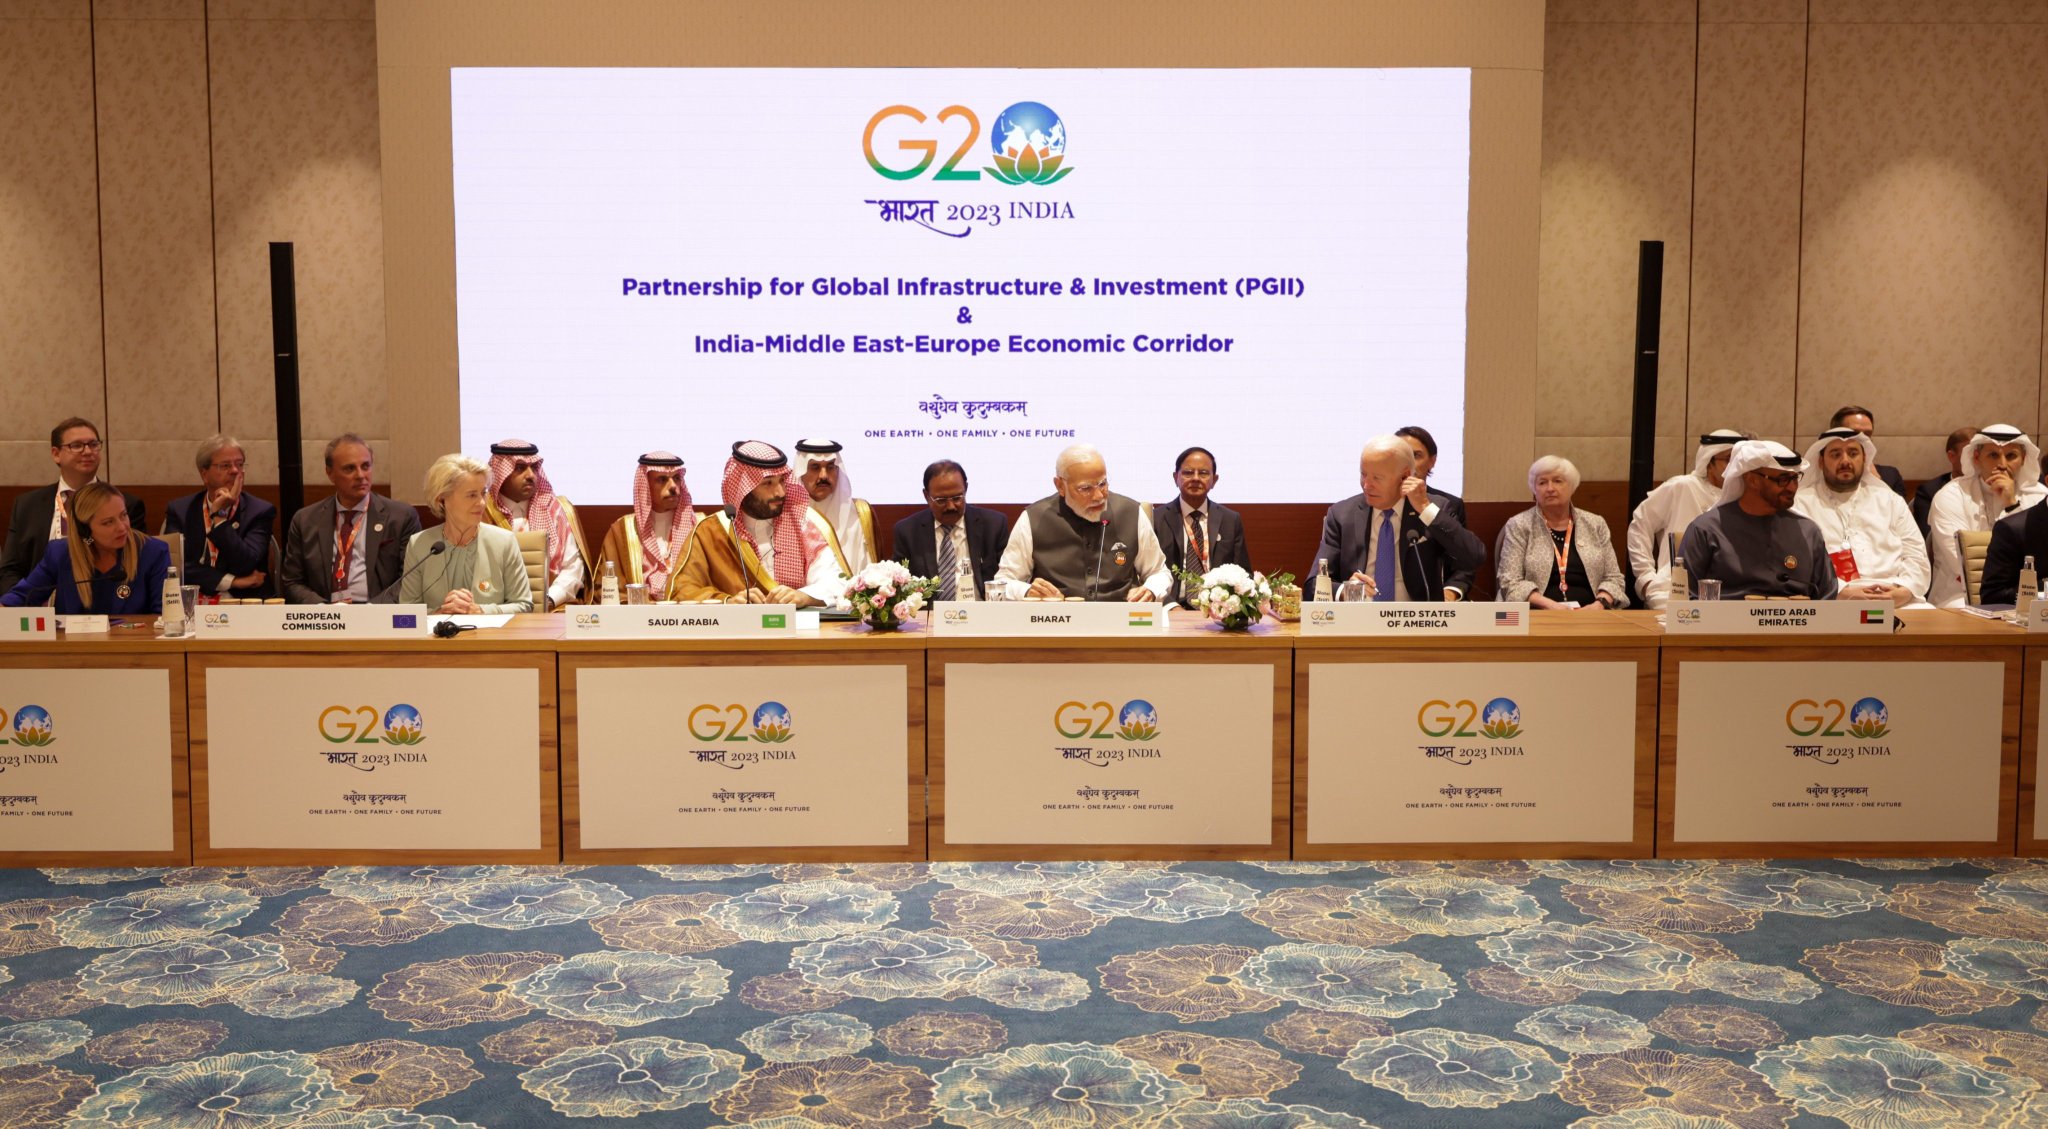 G20 summit witnesses major announcement to connect India to Europe via Middle East